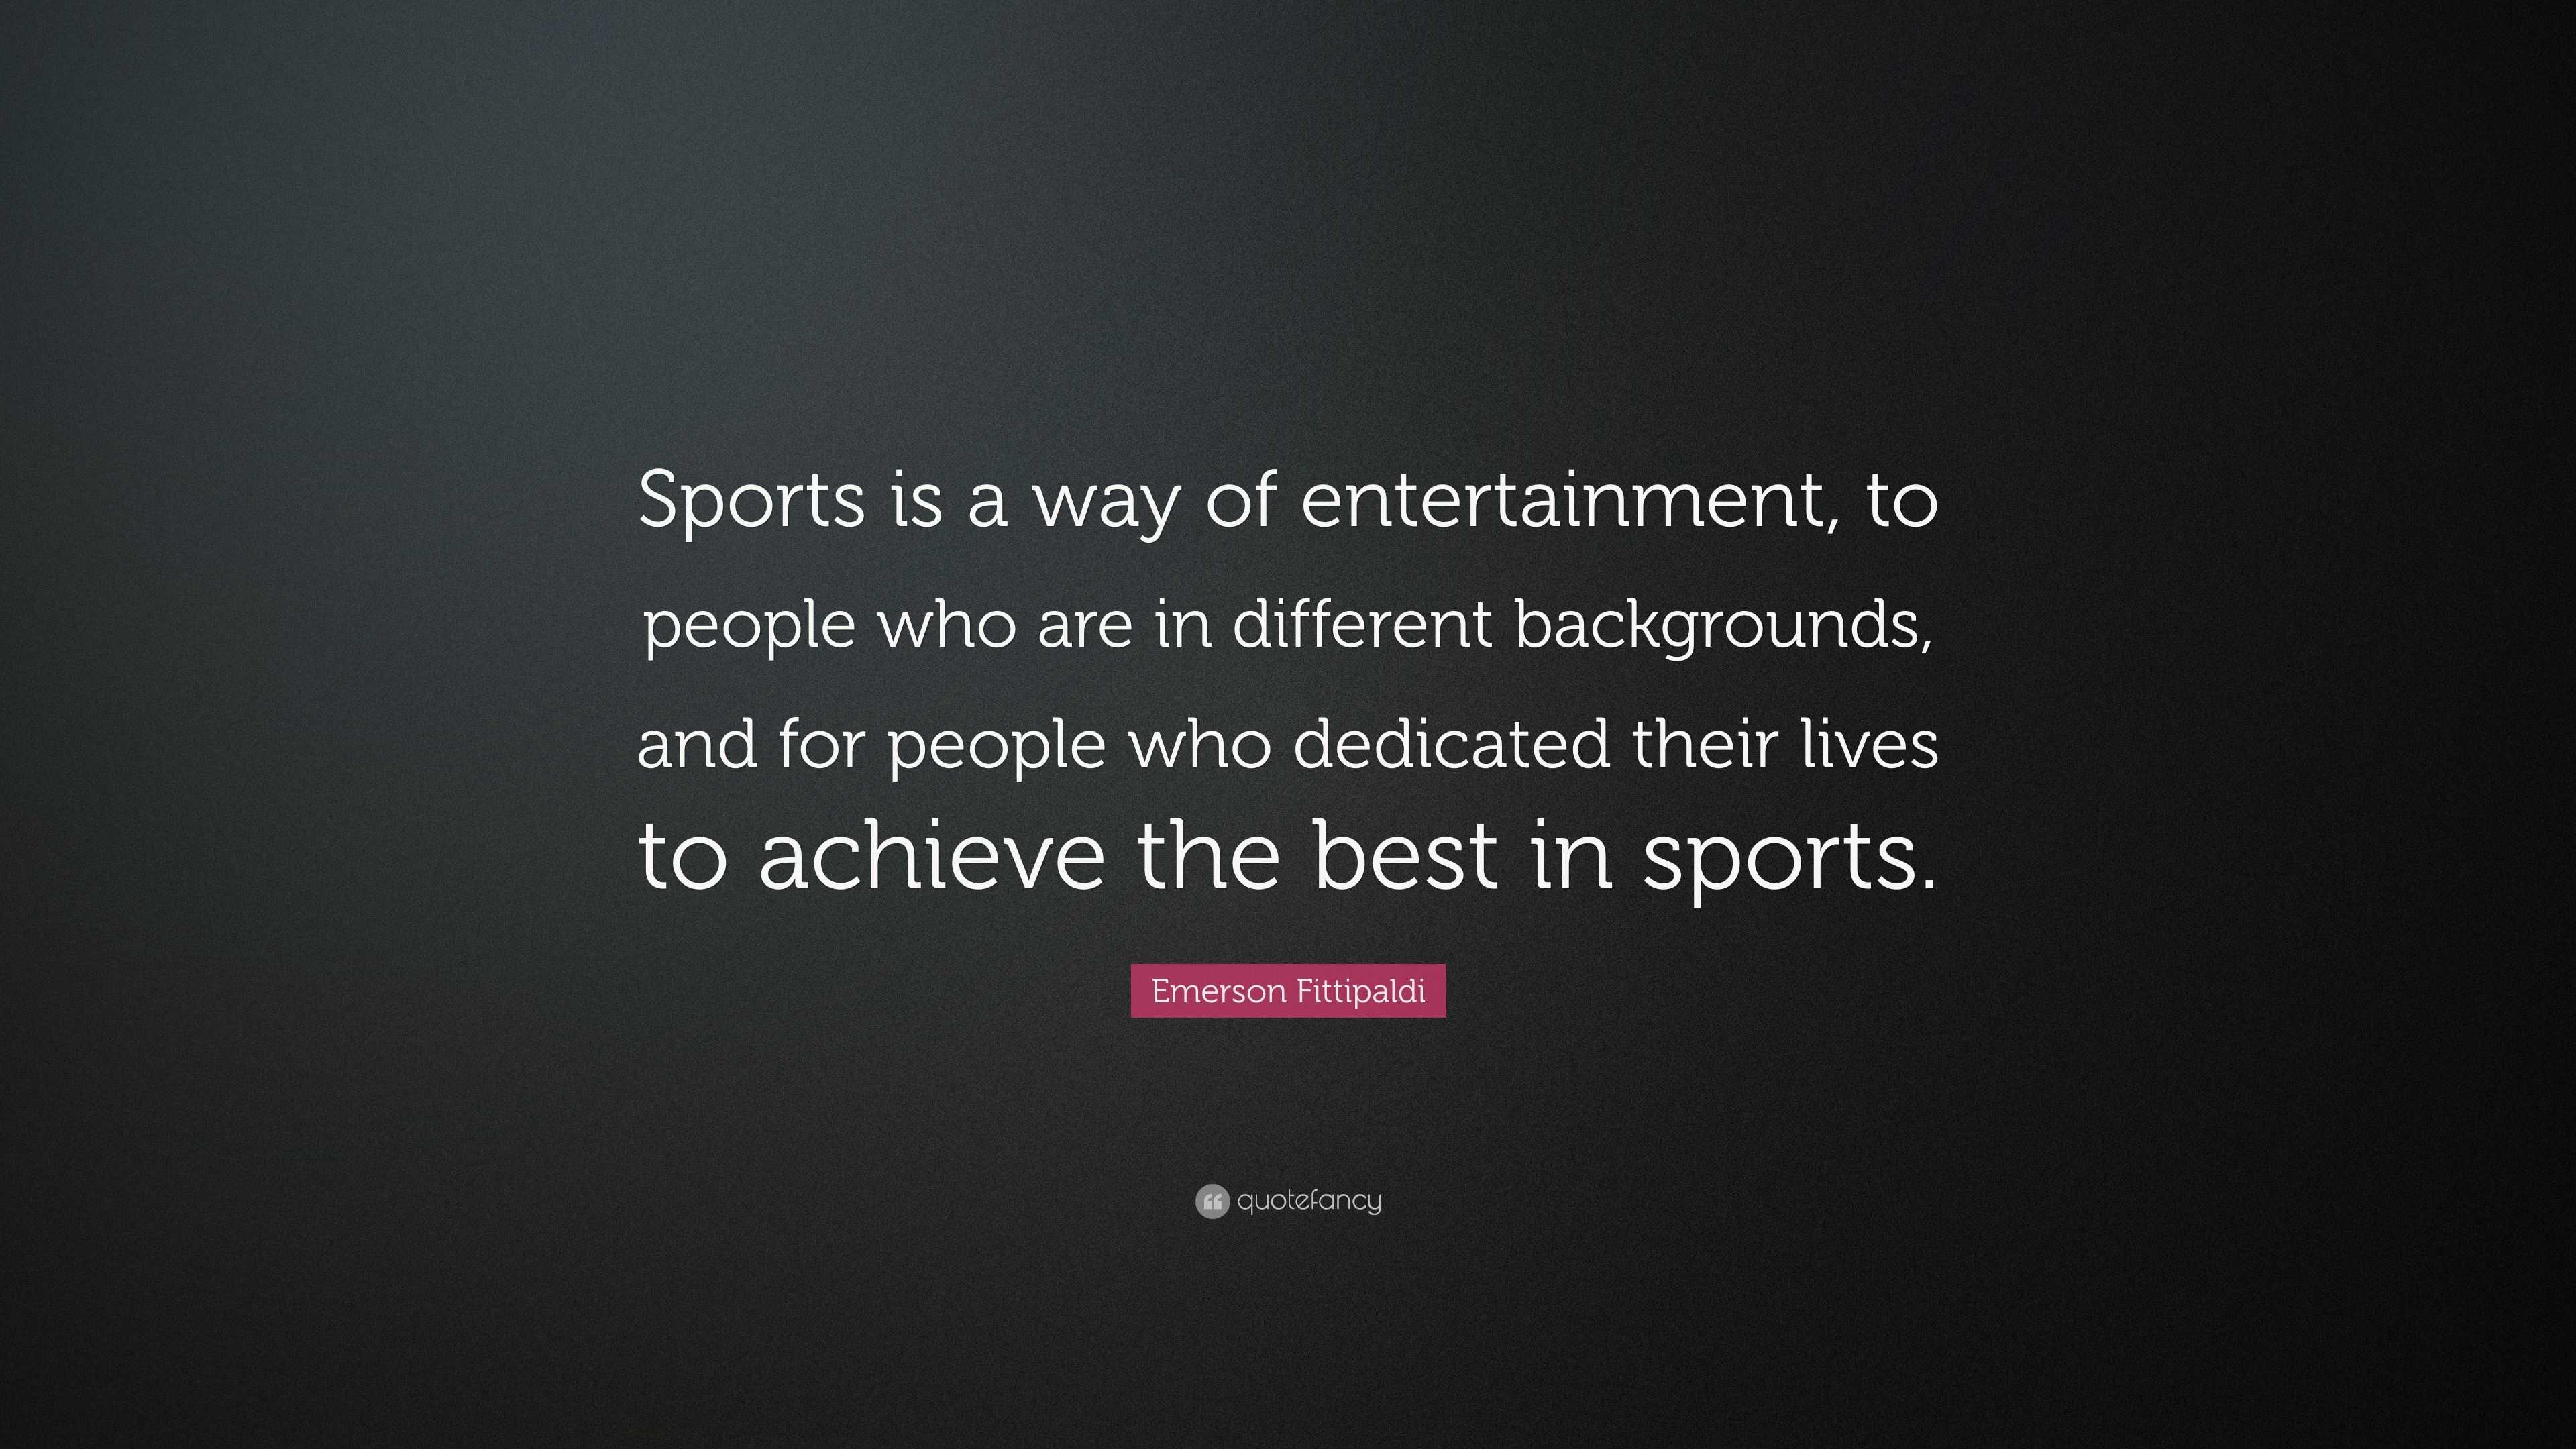 Emerson Fittipaldi Quote: “Sports is a way of entertainment, to people ...